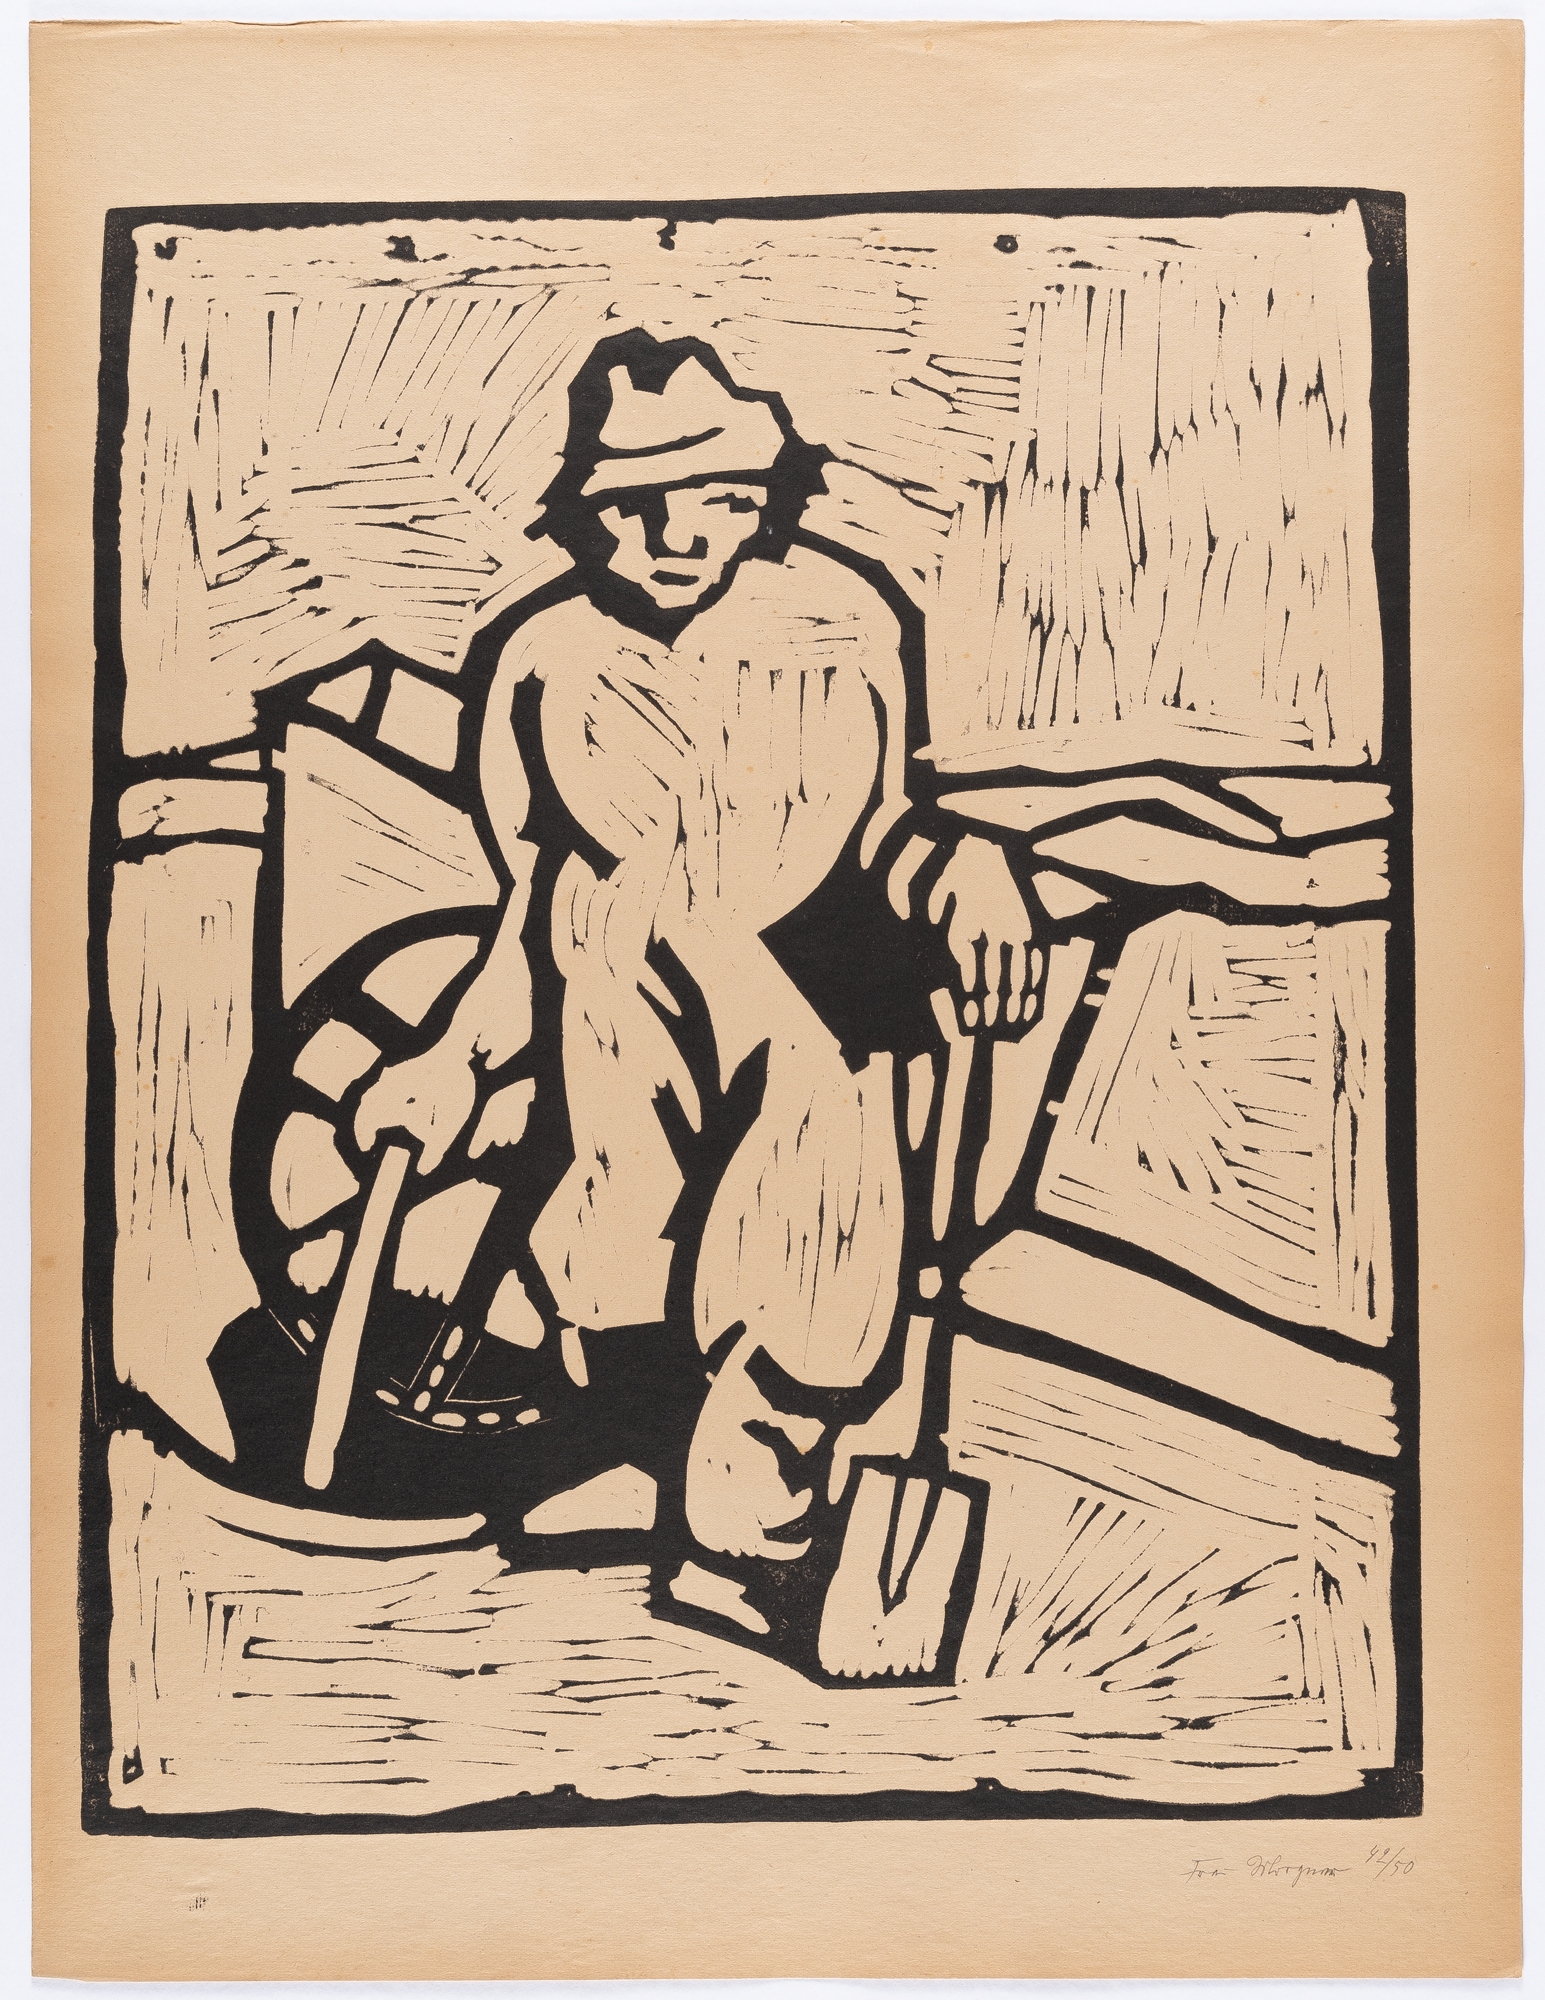 Artwork by Wilhelm Morgner, In Memoriam Morgner. Seven lino cuts from the year 1912, Made of lino prints on wove